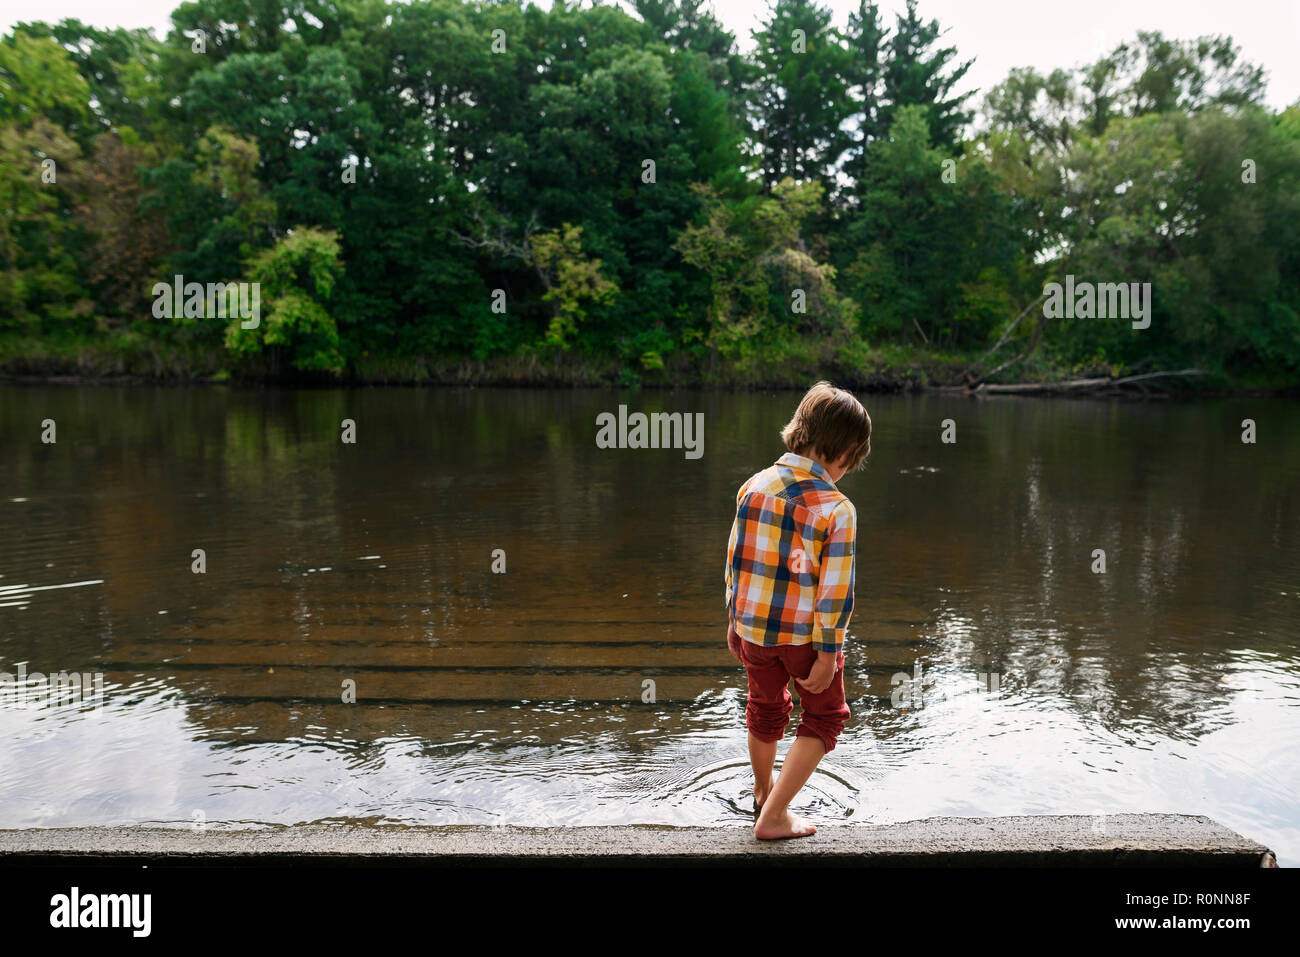 Boy standing by a river dipping his toe in the water, United States Stock Photo